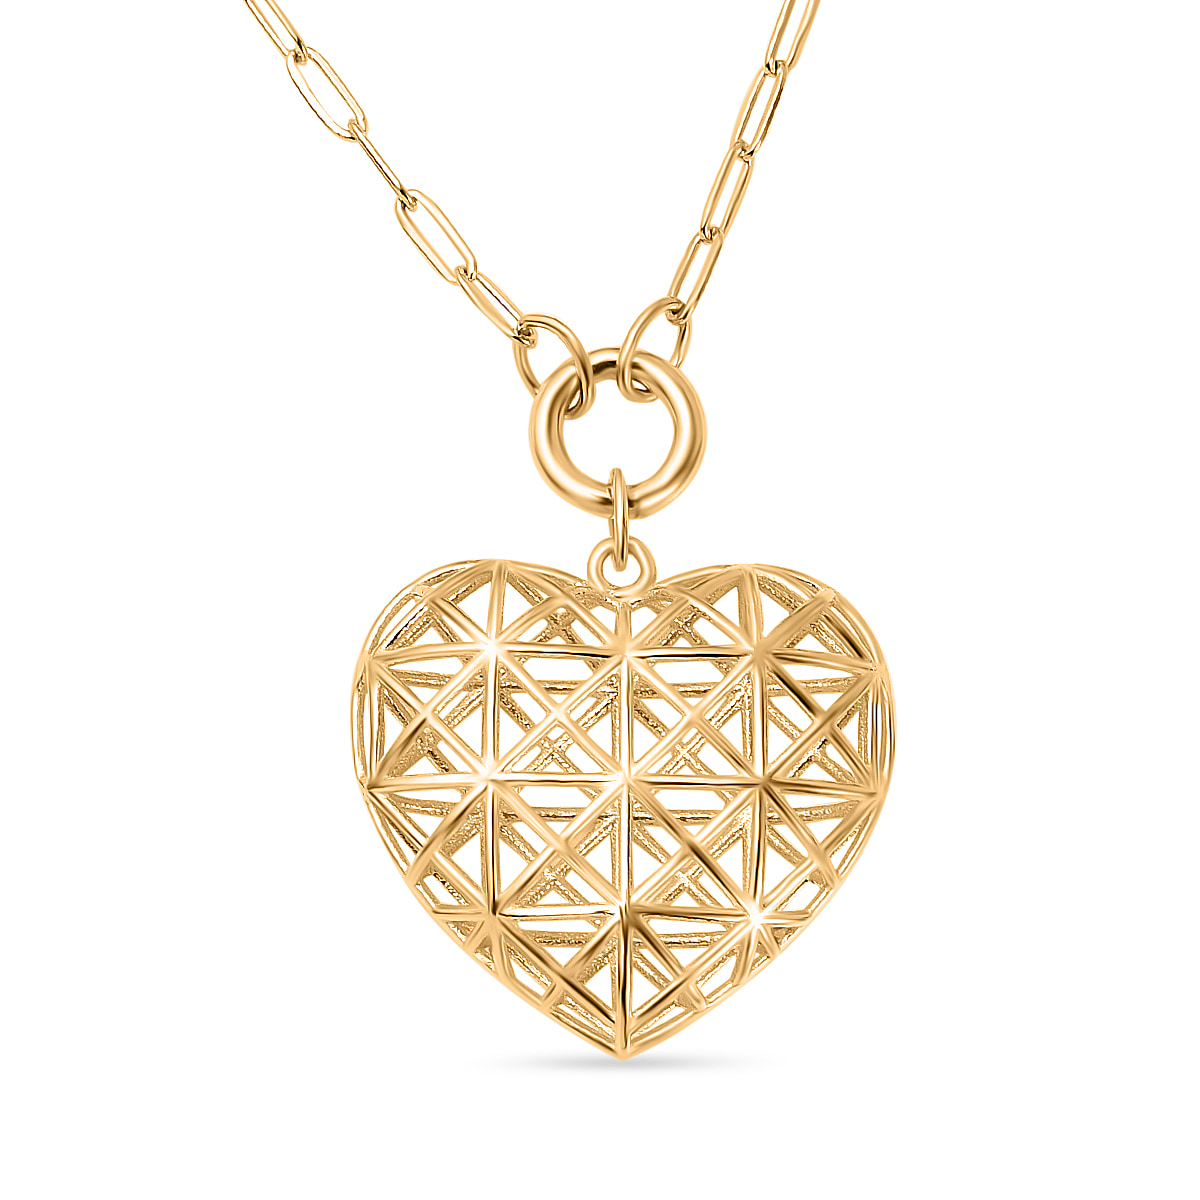 Designer Inspired - 9K Yellow Gold Heart Necklace (Size - 20), Gold Wt 3.30 Gms